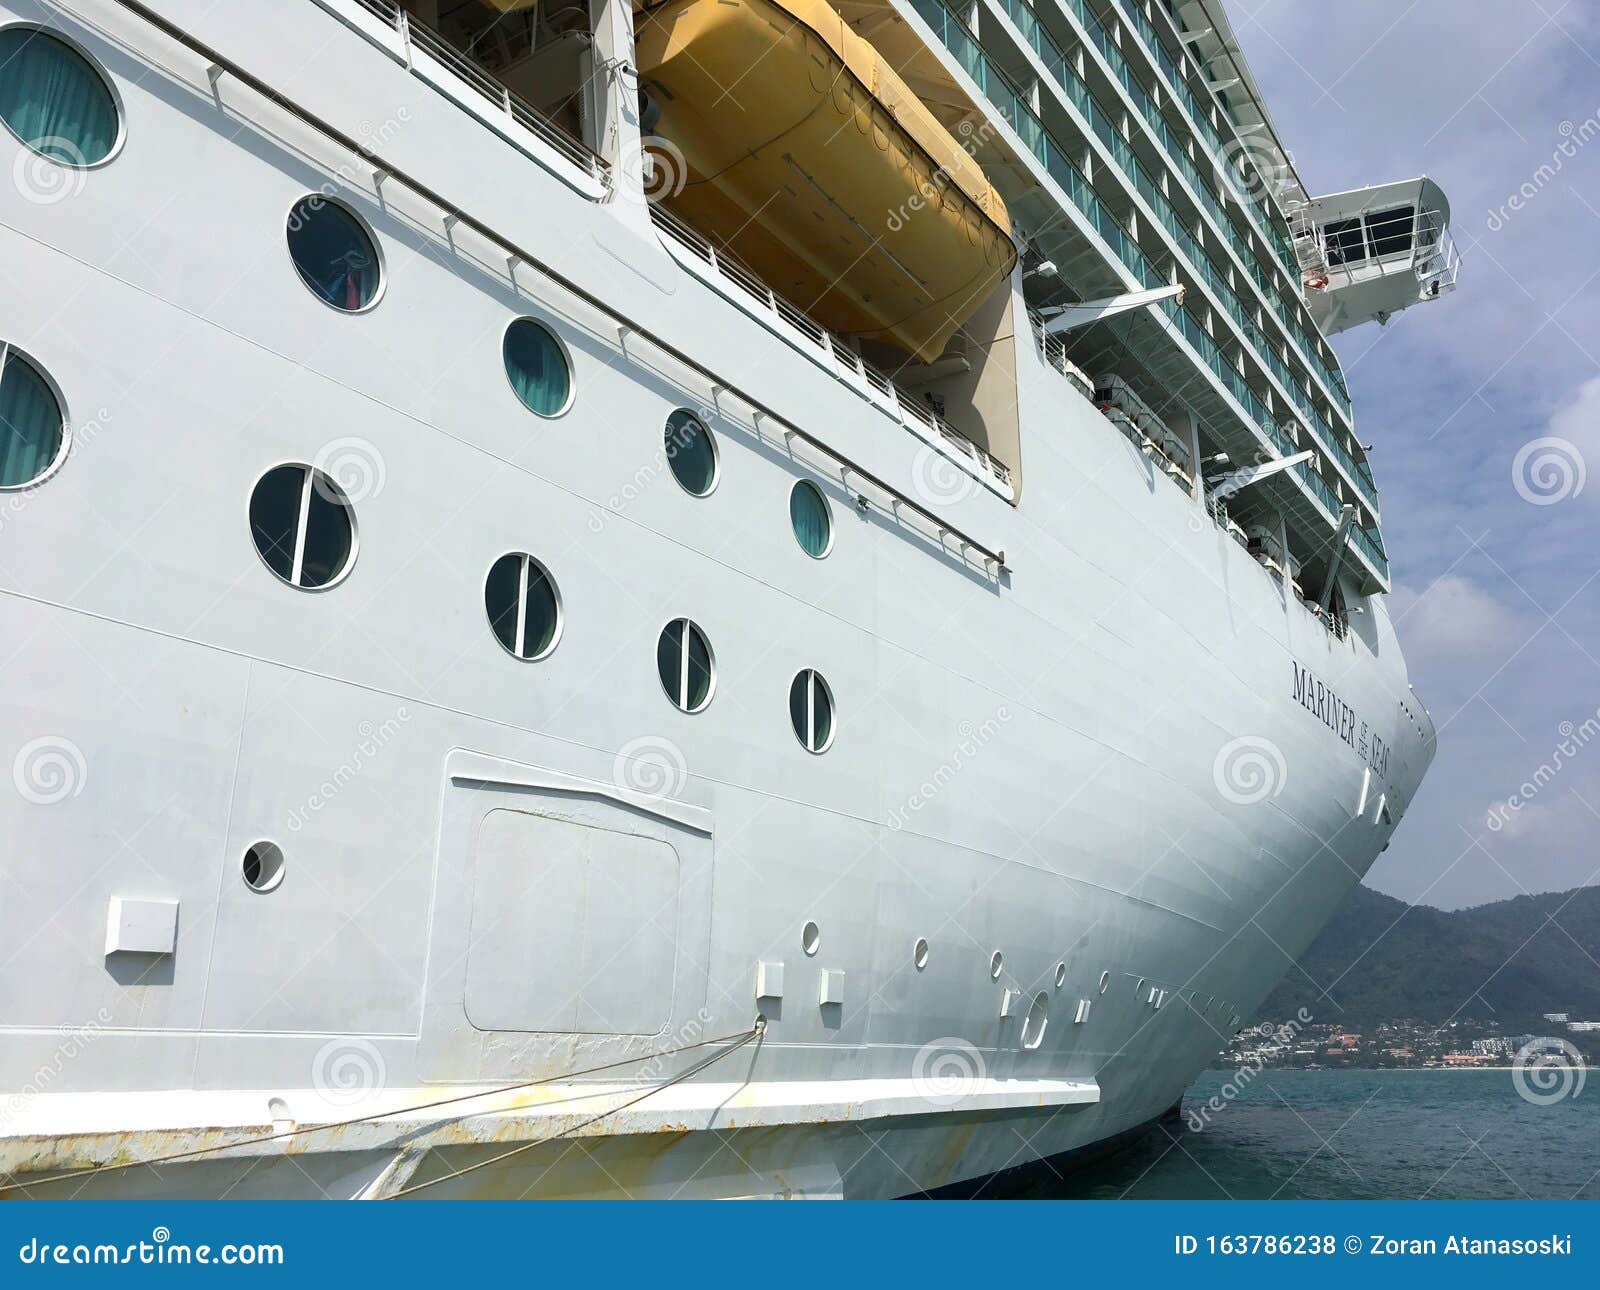 Port vs Starboard: Cruise Ship Left and Right Sides